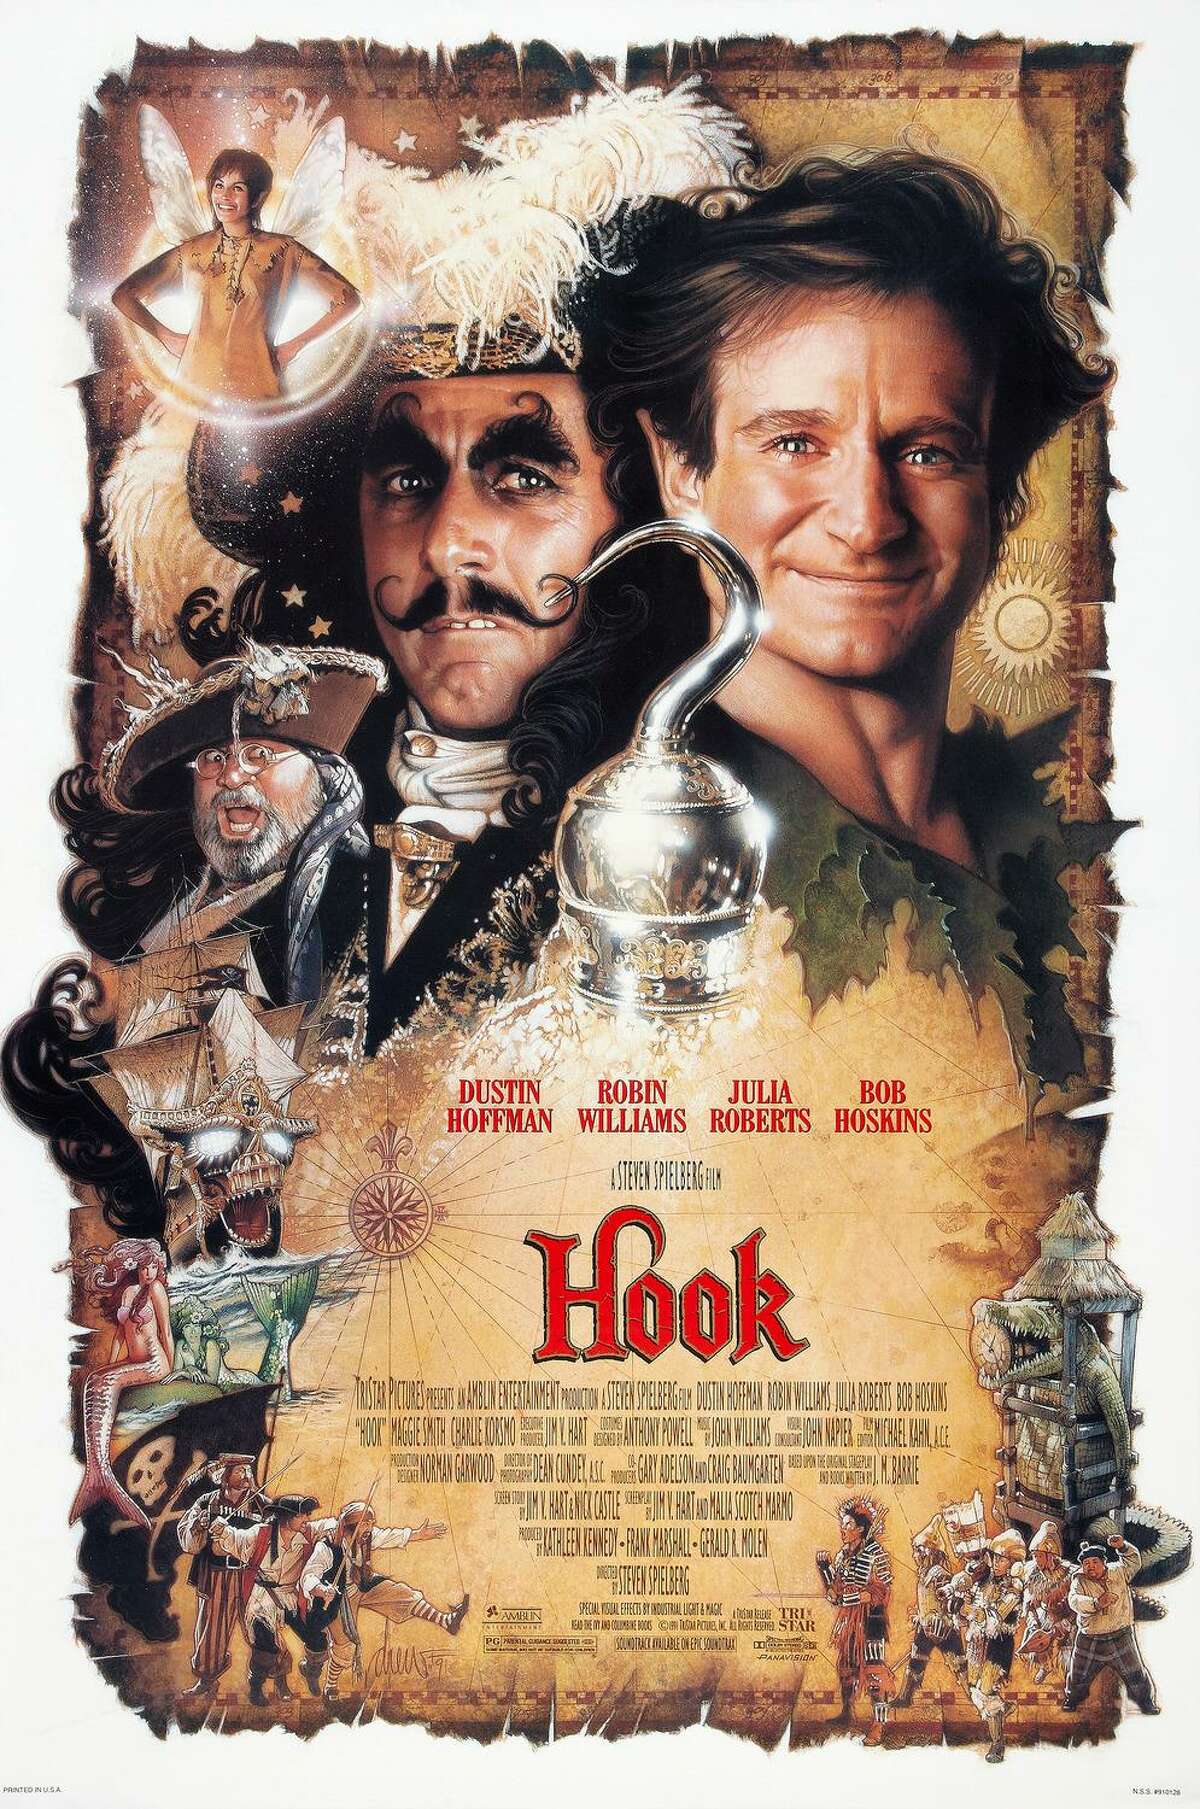 "Hook" is a much better film than it has ever been given credit for.